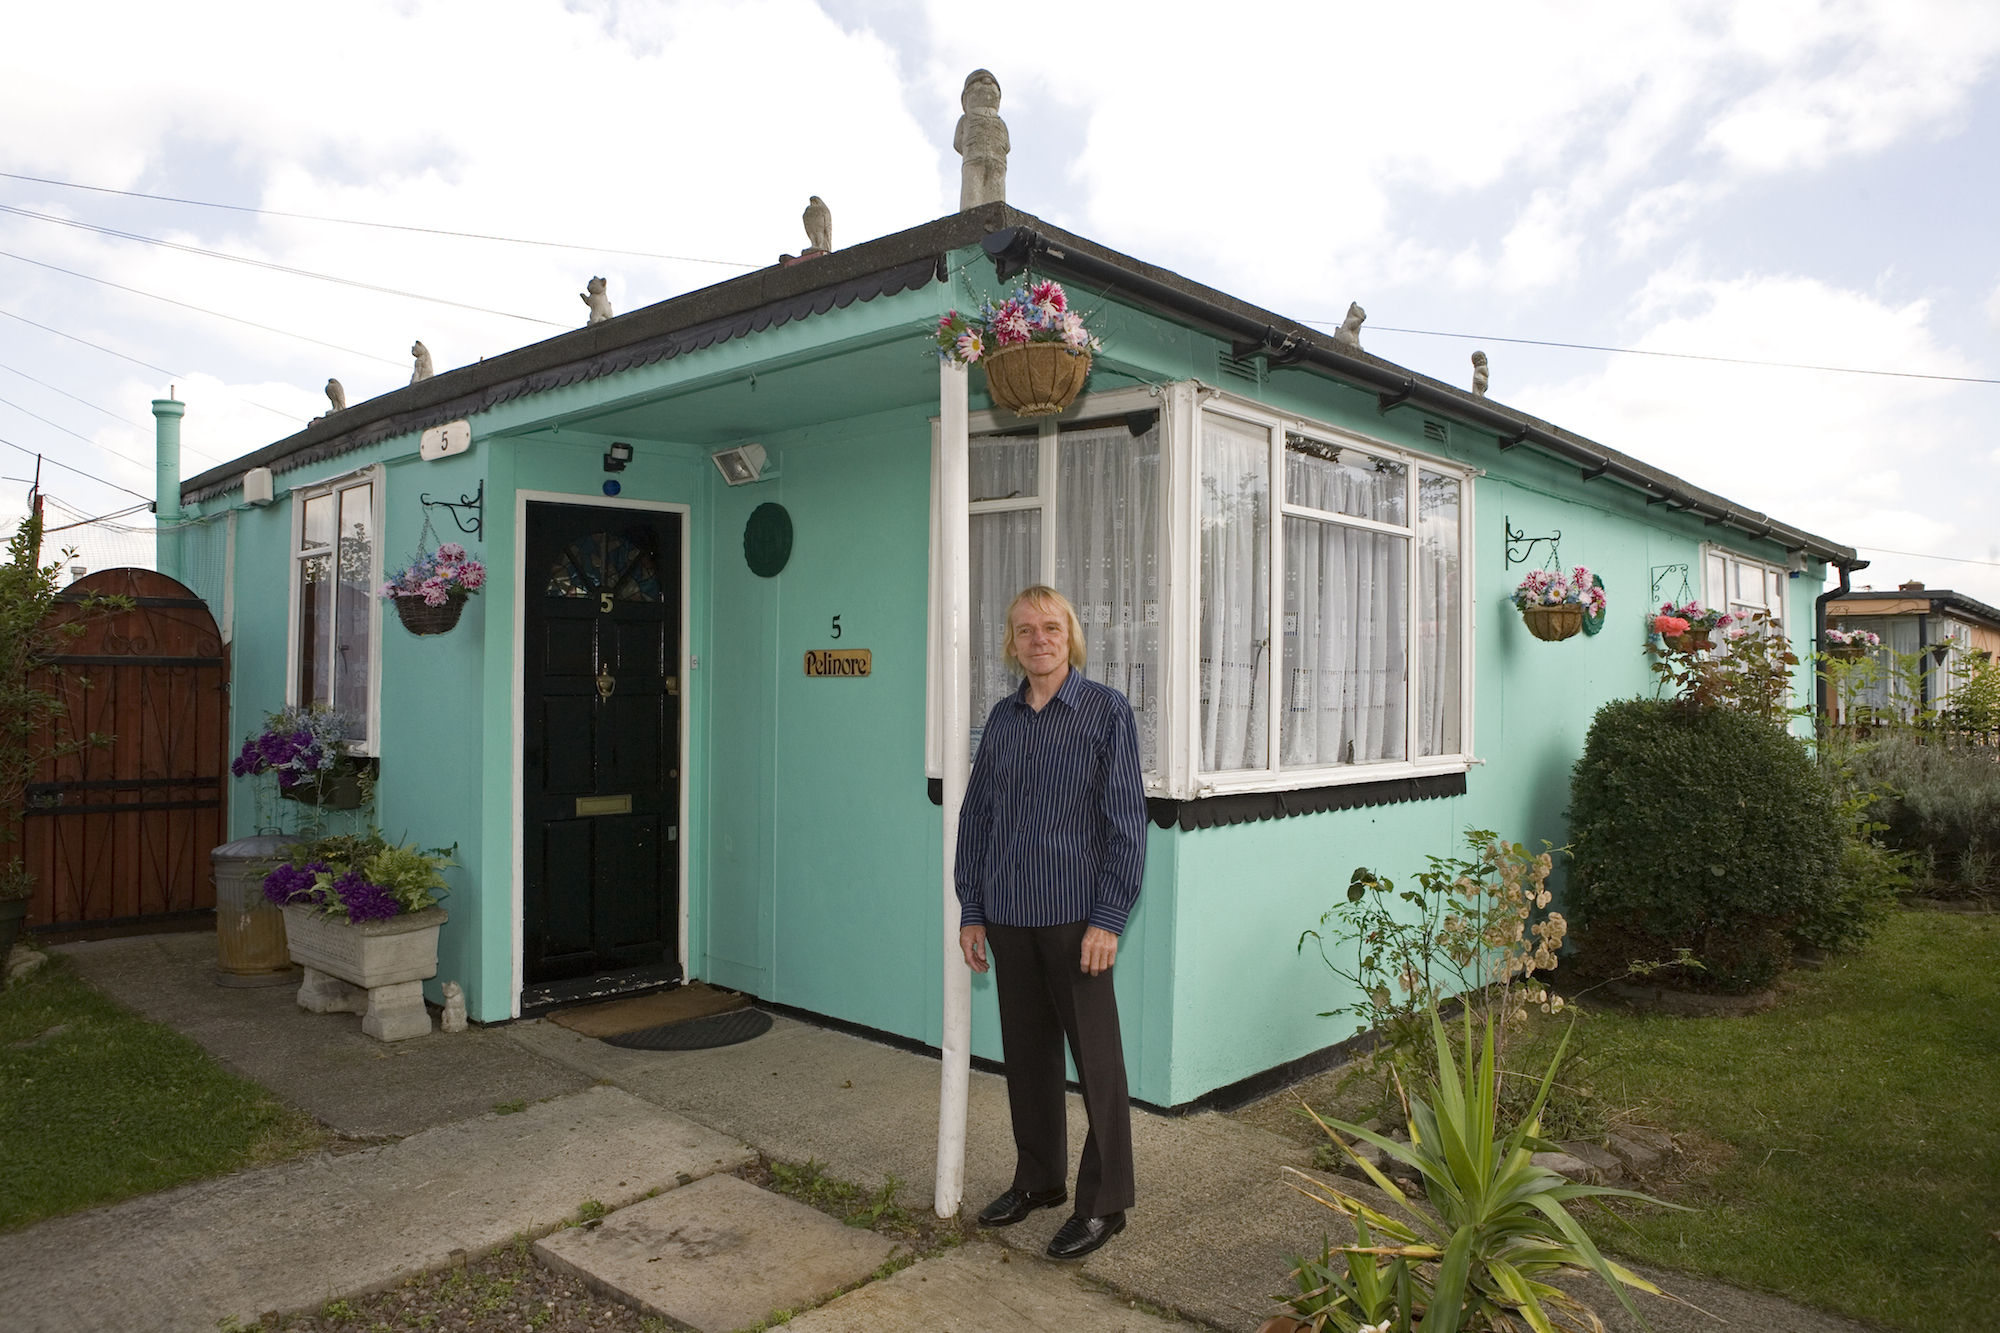 Jim Blackender in front of his prefab in 2009. Jim fought and lost. He raised an army of residents to save the prefabs from demolition but the battle ended up in a ballot which led by 54% to 46% to the 'regeneration' of the estate. By regeneration, the council means demolition of the post-war bungalows and replacement with double and triple storeys dwellings. The idea is to triple the density of the population but it's difficult to find out more as Lewisham is remaining very discreet about the future. The demolition process should have started in October 2012 but in June 2013, it still hadn't begun. On the estate, more and more prefabs are being boarded up. Residents were hoping they would be rehoused in new houses at the same location but it doesn't look like it will happen, so they are ending up accepting other housing options offered by the council as Jim and his wife Lauren did. In September 2012, they left their prefab for good for a 2 bedroom attached house in Rochester, Kent. I paid them a visit in Winter 2013. They both became very emotional when talking about their prefab. The scar hasn't healed yet. 'In a prefab, youíve got a two-bedroom detached property and unless you have lots of money, youíre never ever going to get that again. It was something we were fortunate to have as council tenants. Once the prefabs are gone, theyíre gone forever; youíre never going to get back to a place like that. I liked everything about the prefab ñ I couldn't put a finger on it. It was the people, the location. When we moved in 20-odd years ago, there was a really strong community, and there was no way anyone could have taken that place from the residents. But itís been left to rot, the Council should have been carrying out repairs, painting and redecorating, so people would want to live there, but hardly anything has been done to the estate. Itís depressing to watch it fall into disrepair'.